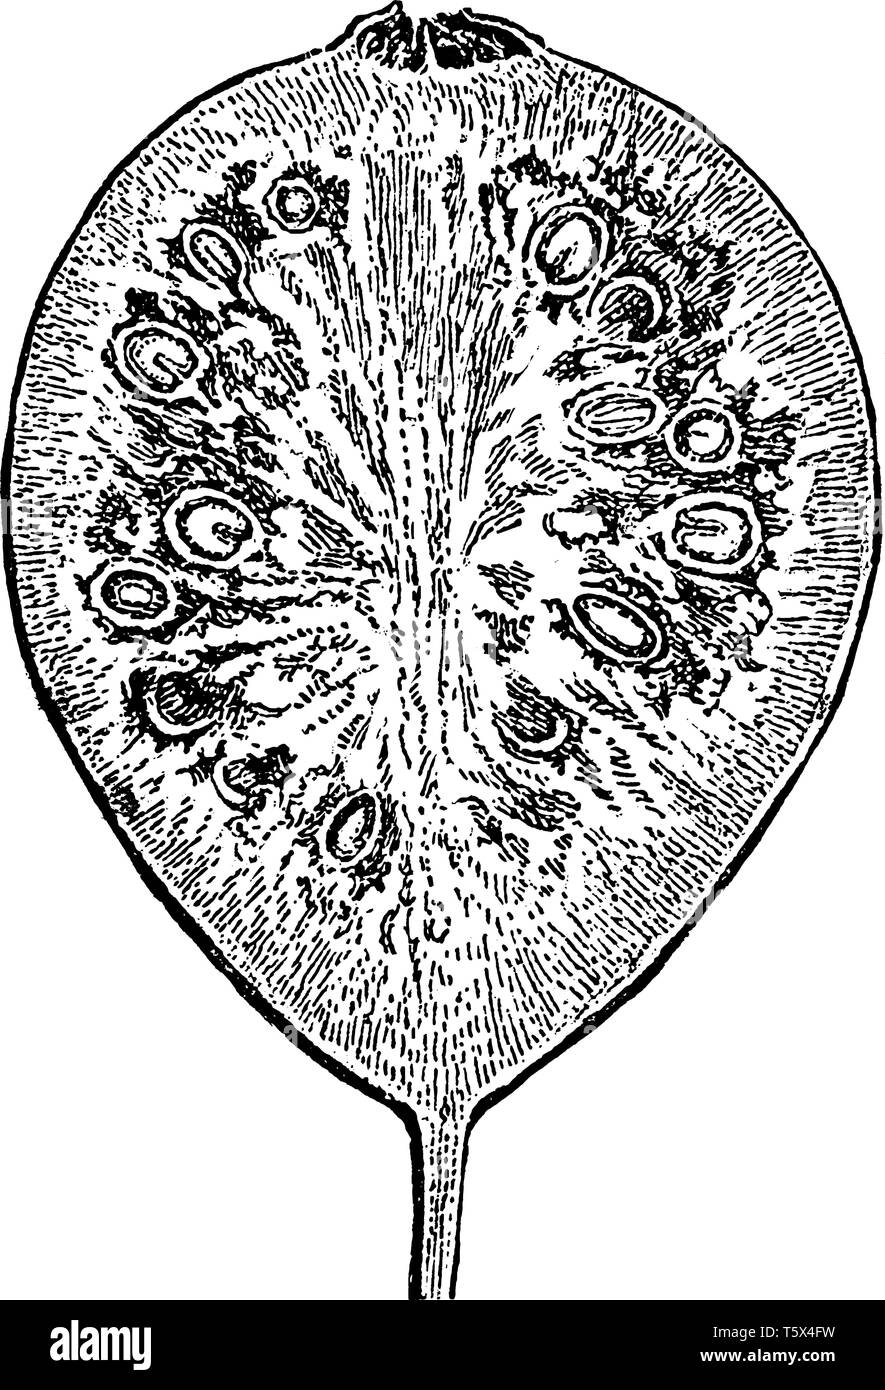 A picture showing the Section of the Apple Guava also known as Psidium guayava. It is a small tree in the Myrtaceae family, vintage line drawing or en Stock Vector